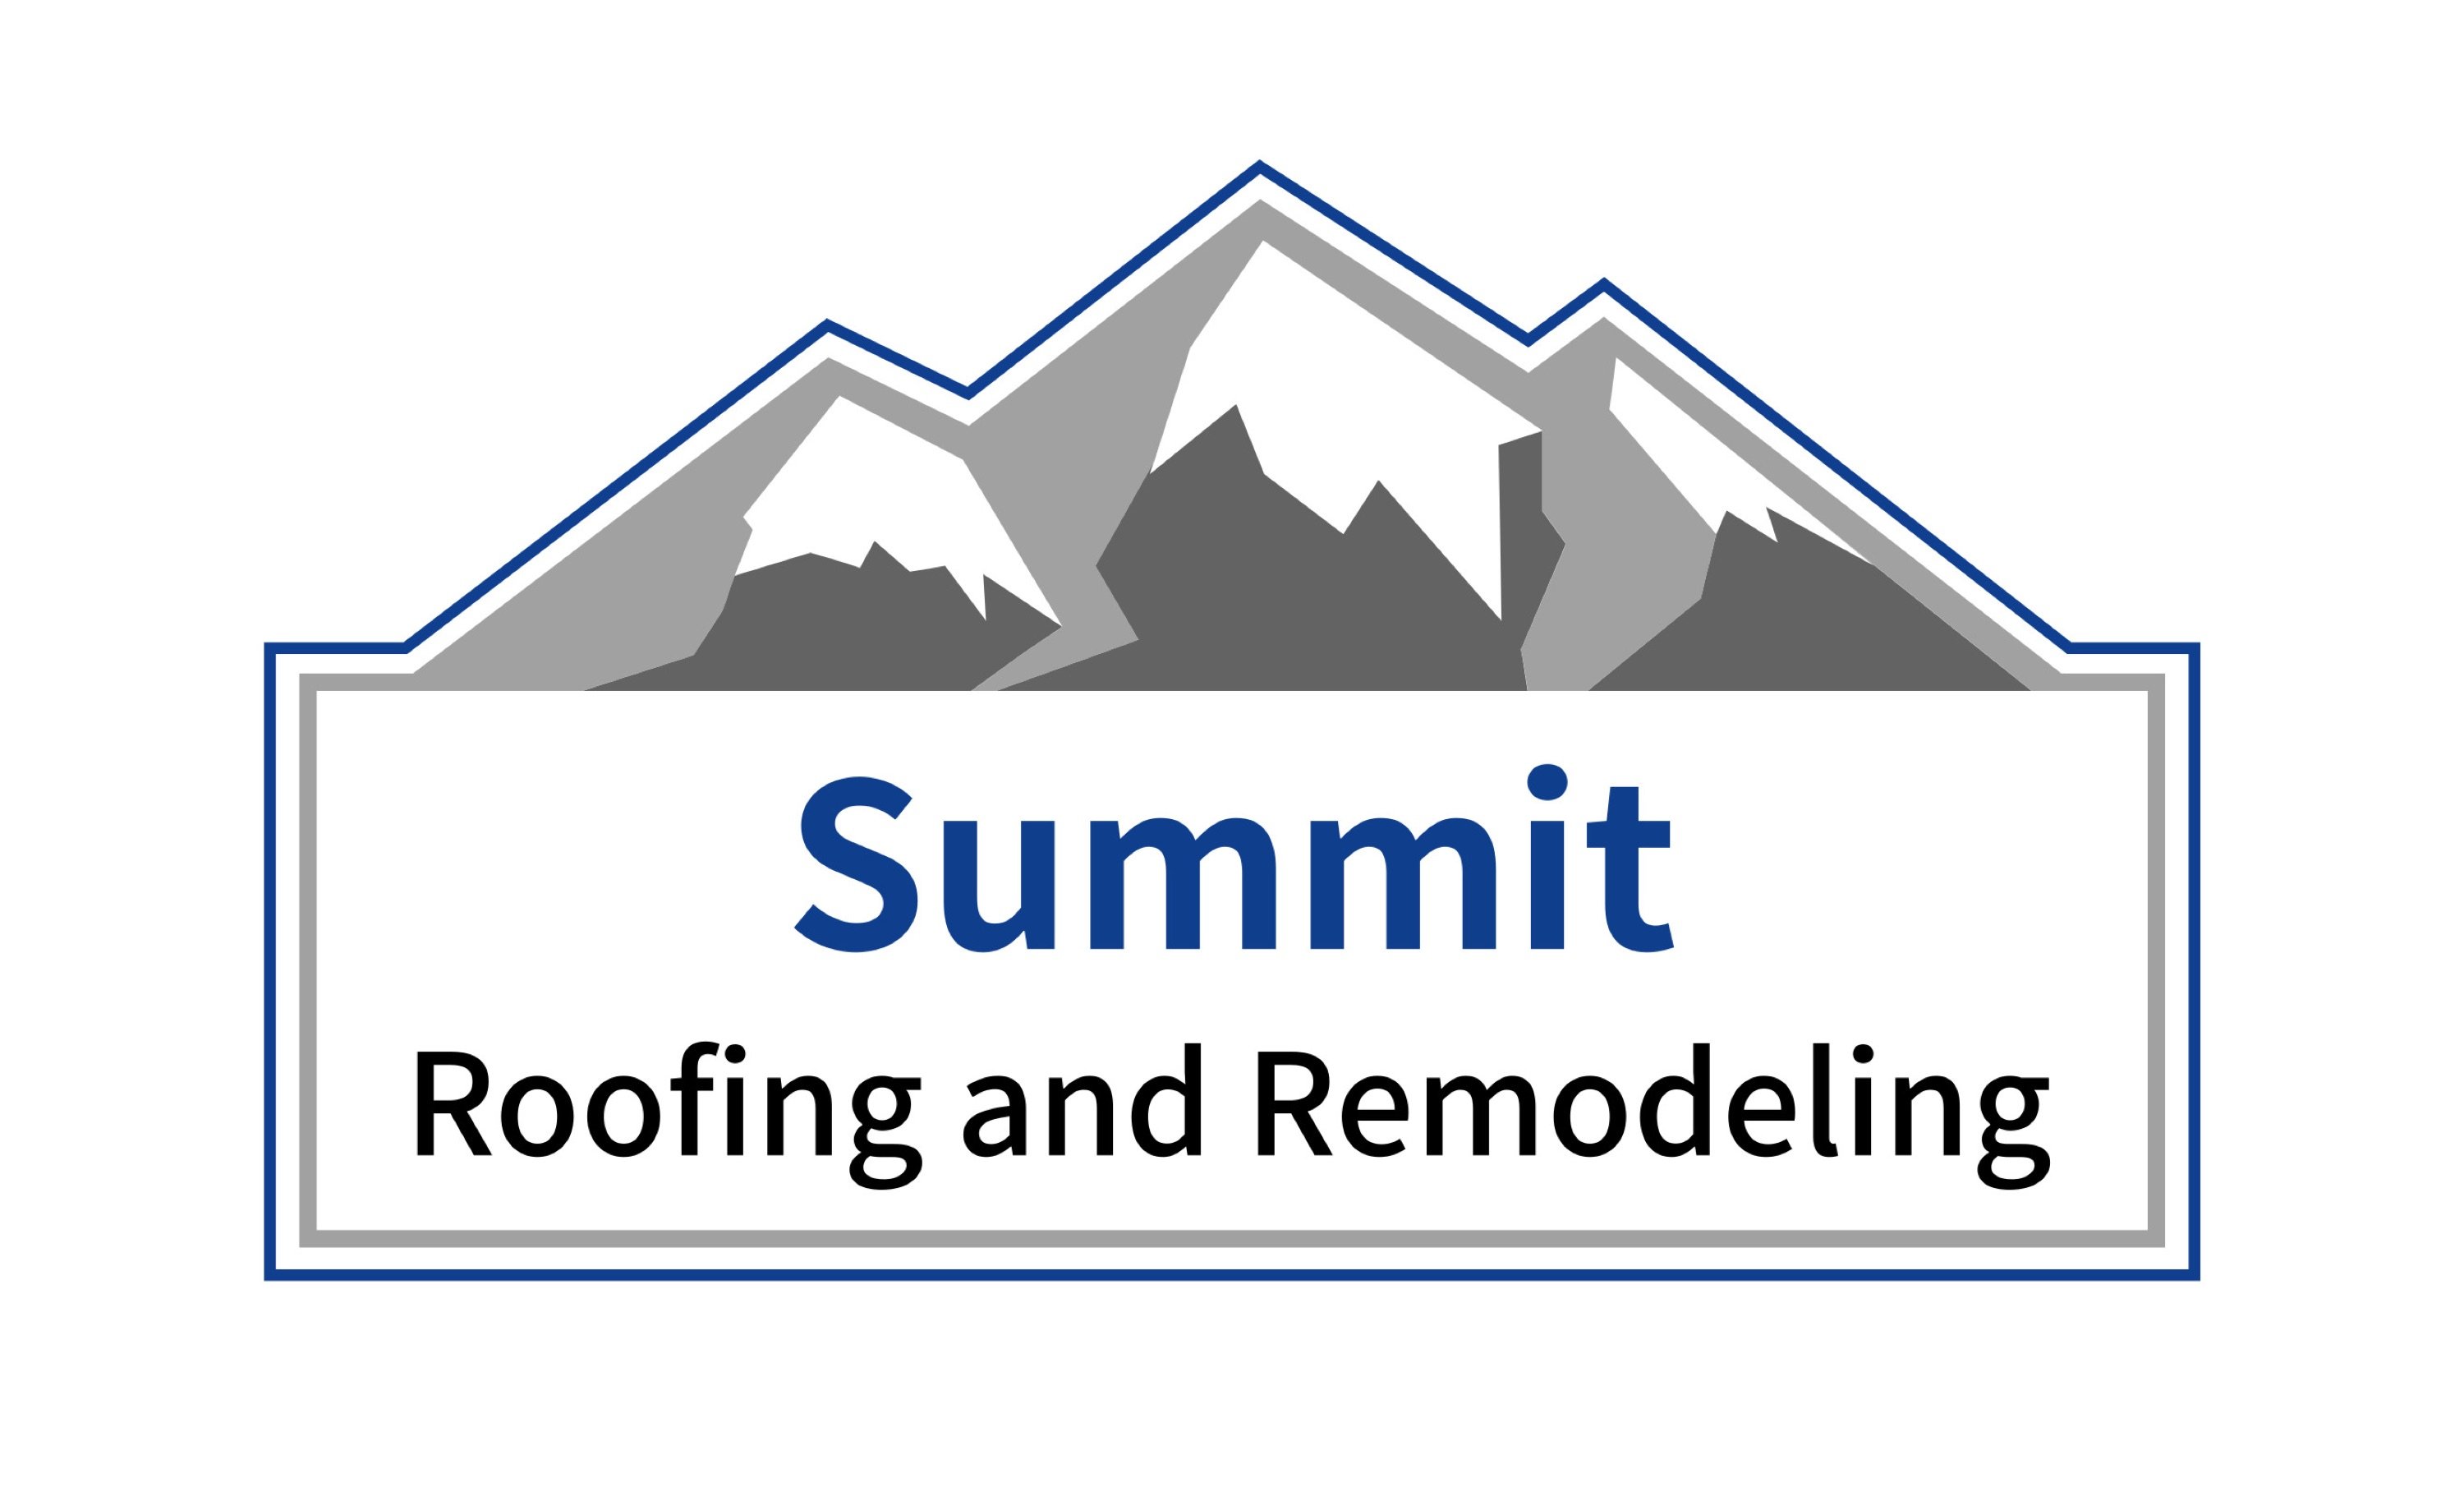 Summit Roofing and Remodeling Logo